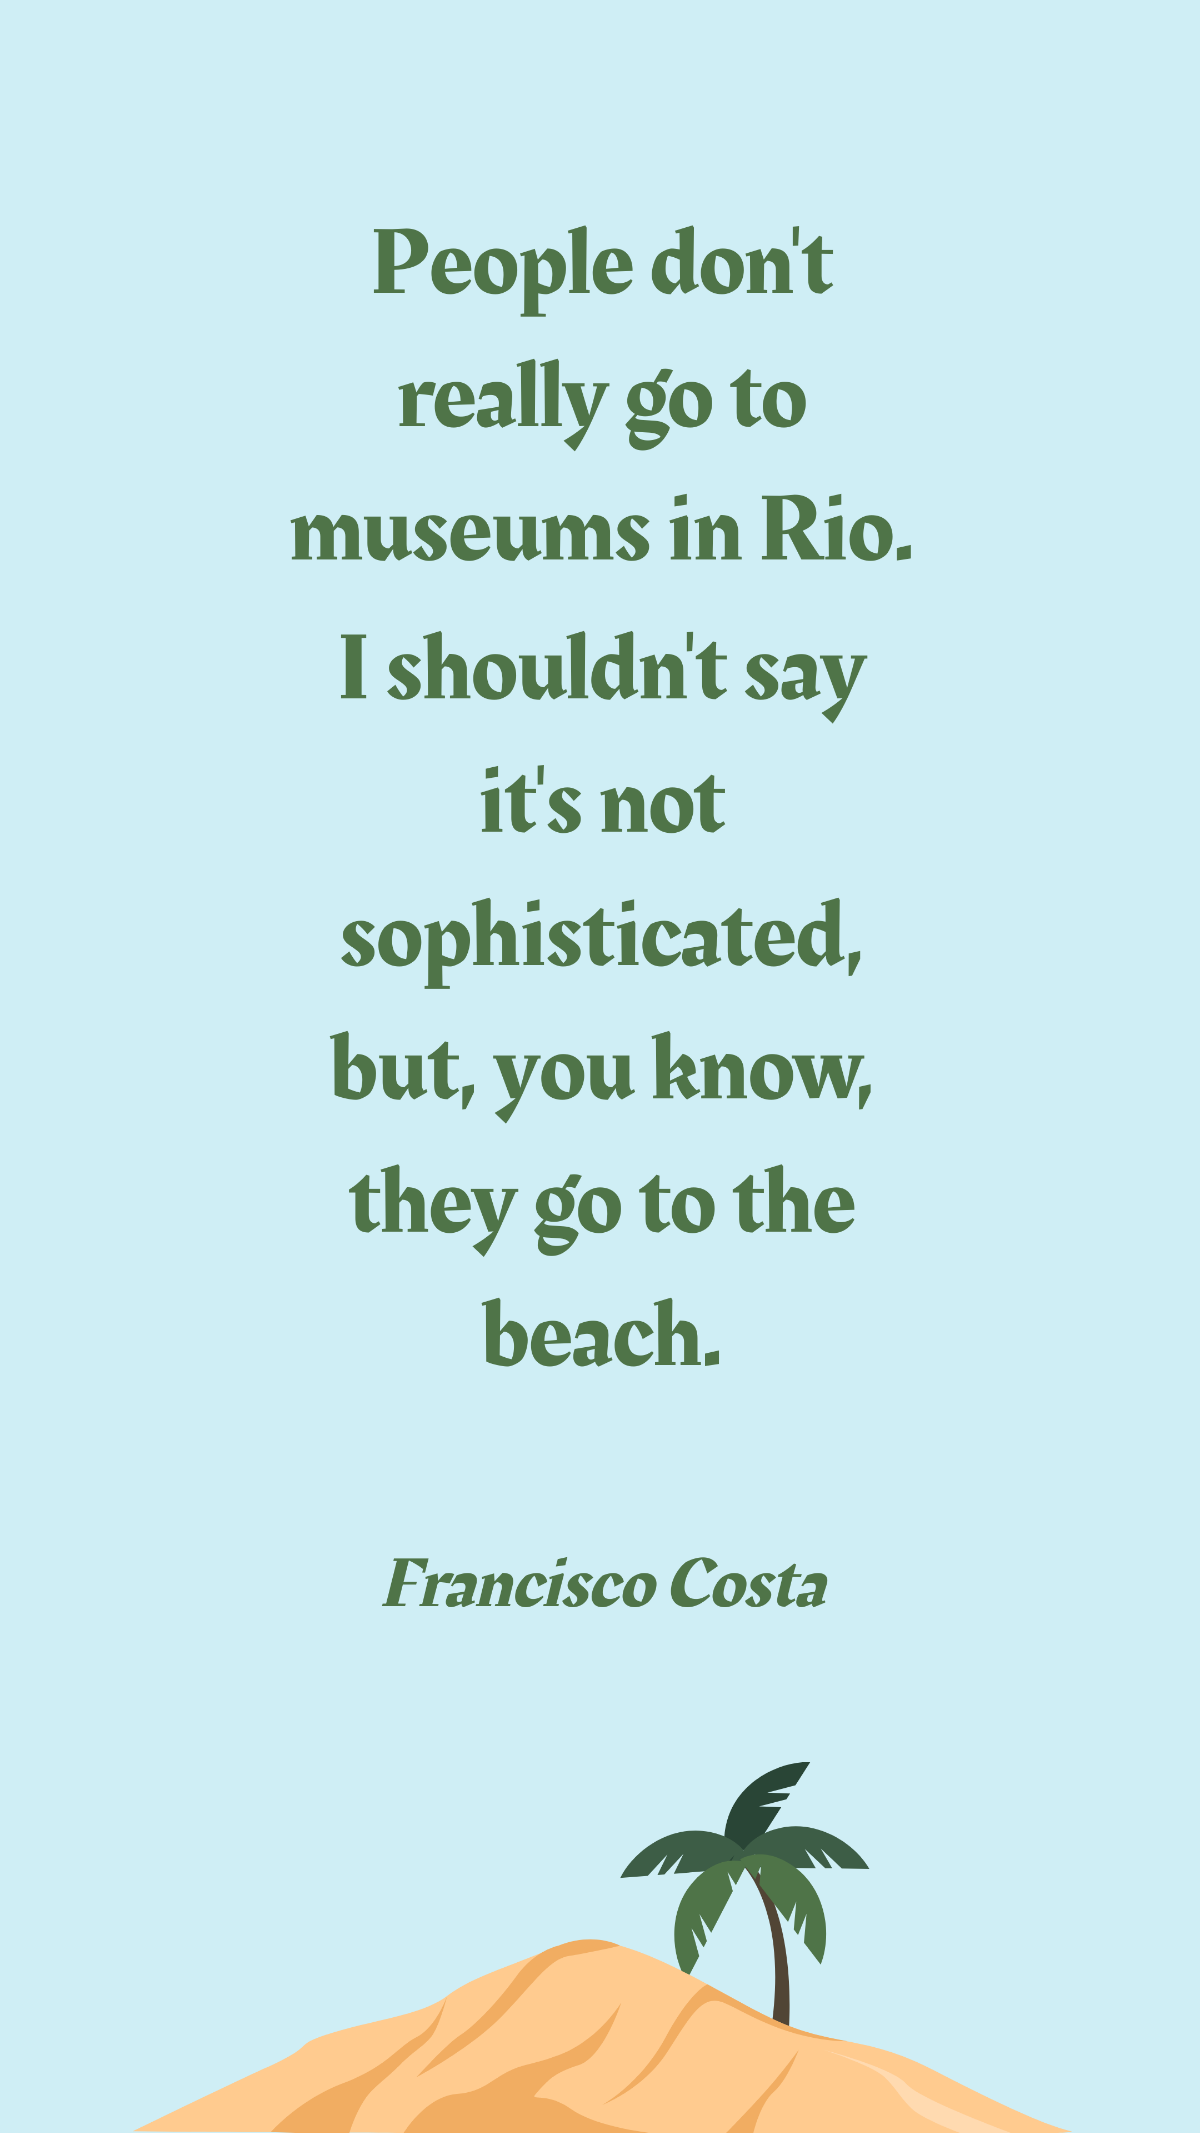 Francisco Costa - People don't really go to museums in Rio. I shouldn't say it's not sophisticated, but, you know, they go to the beach. Template